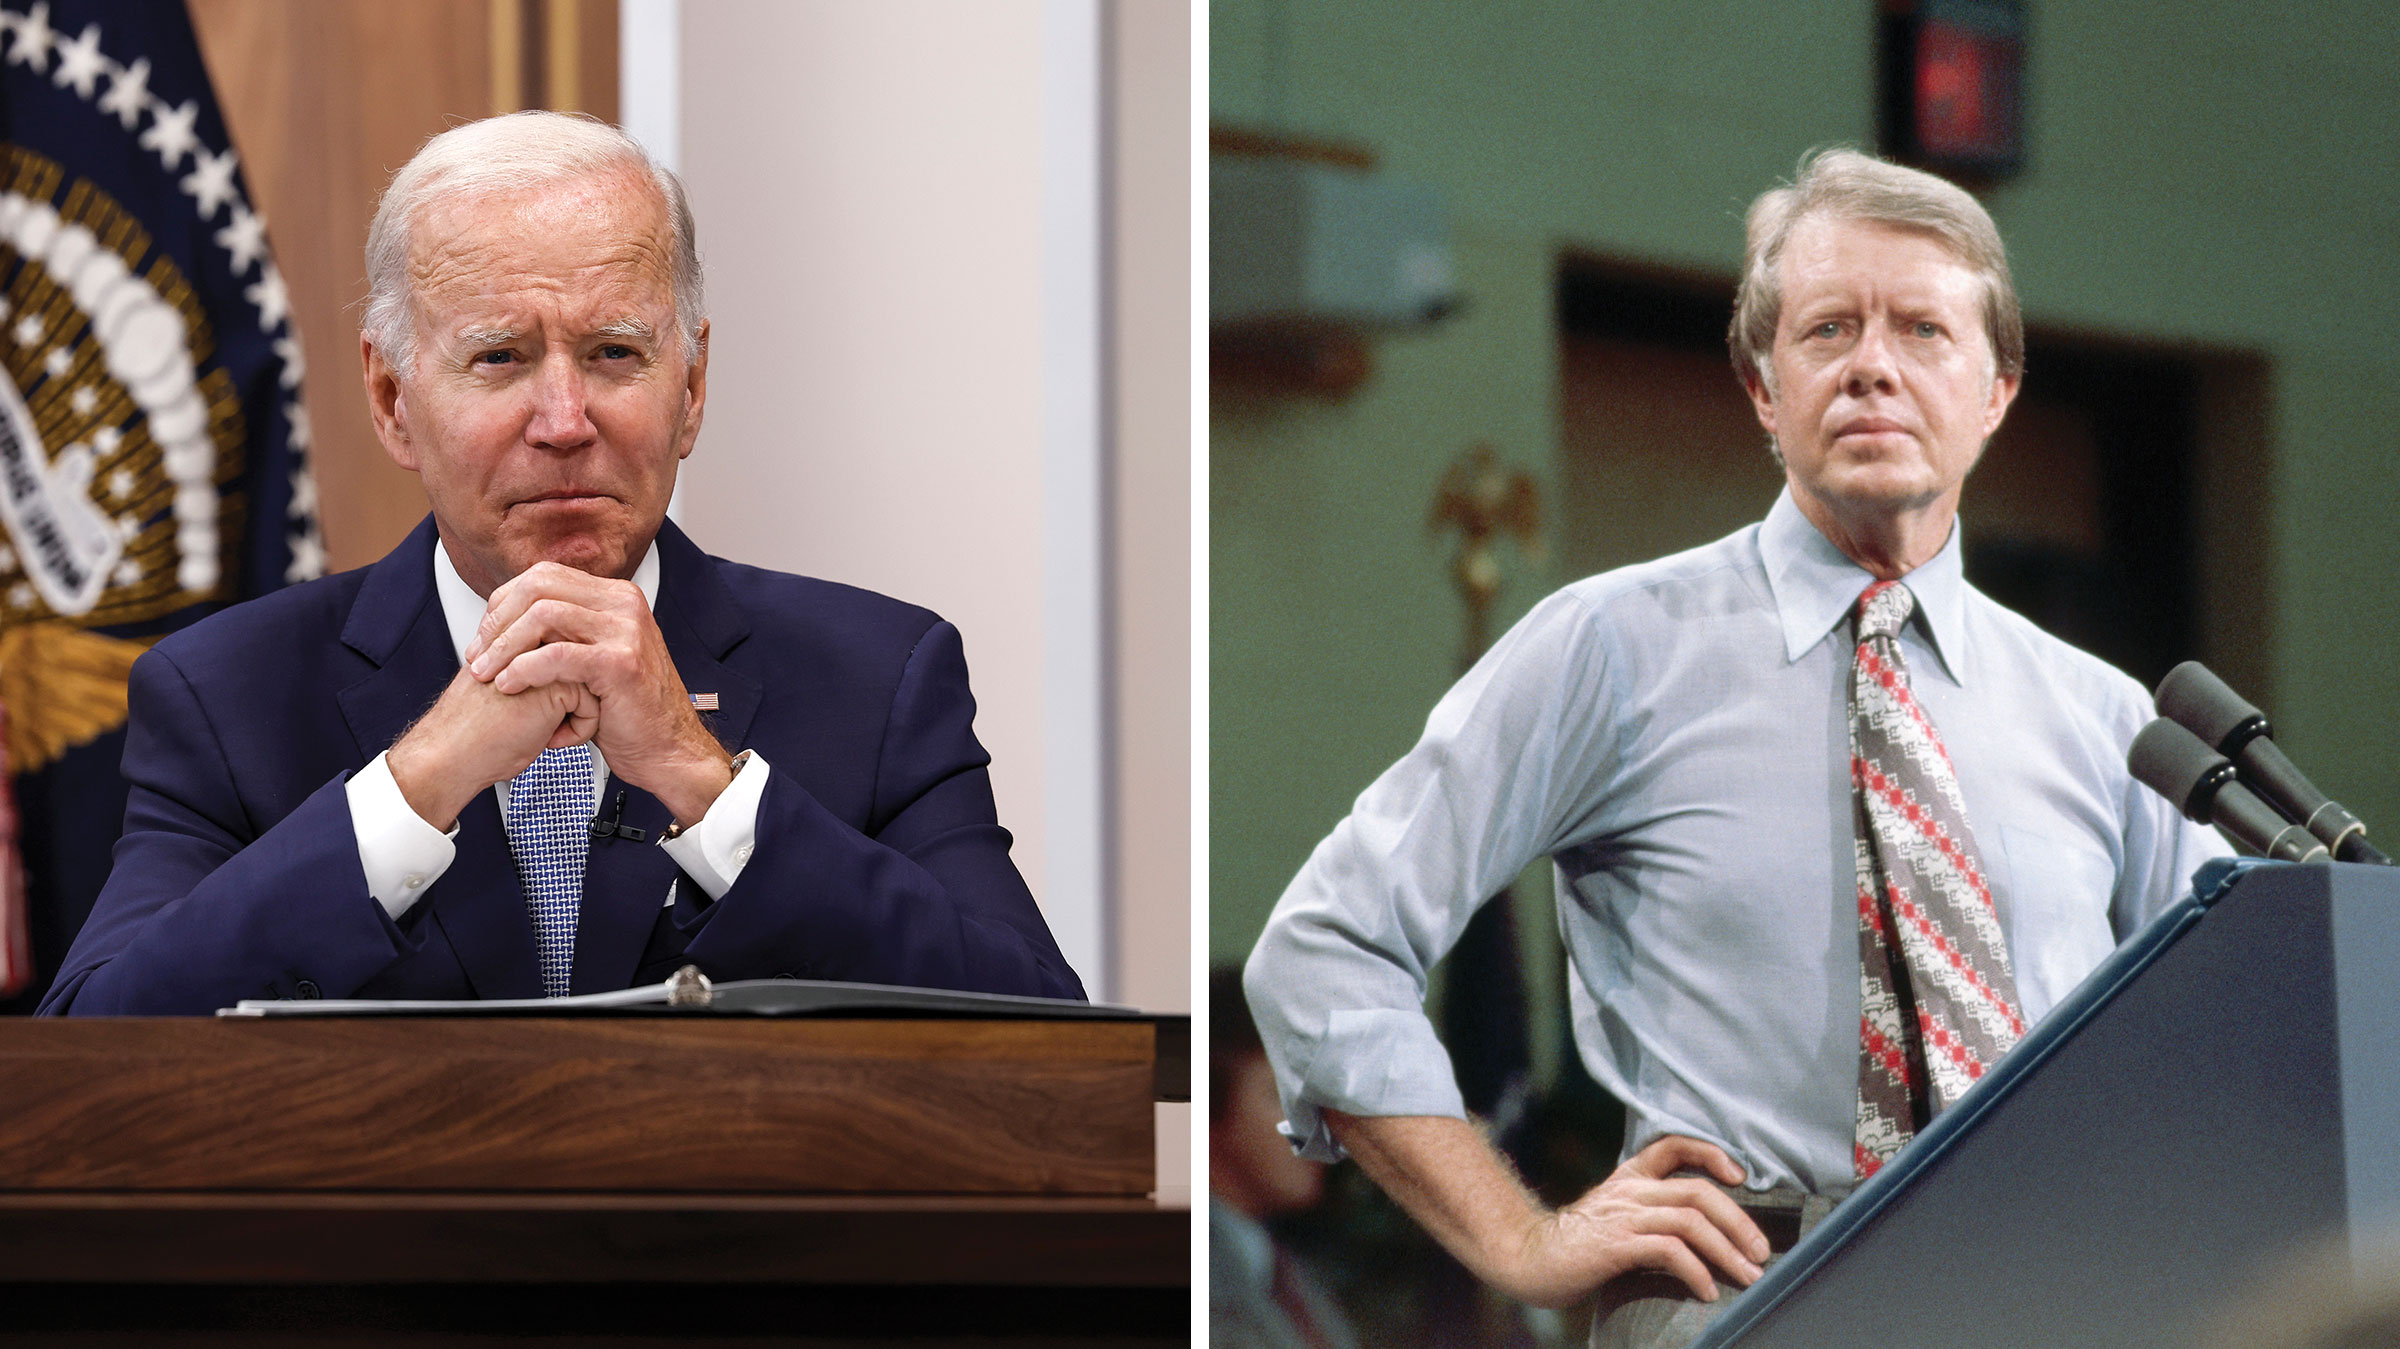 President Joe Biden, left, and President Jimmy Carter, right. (Anna Moneymaker—Getty Images; Wally McNamee—Corbis/Getty Images)